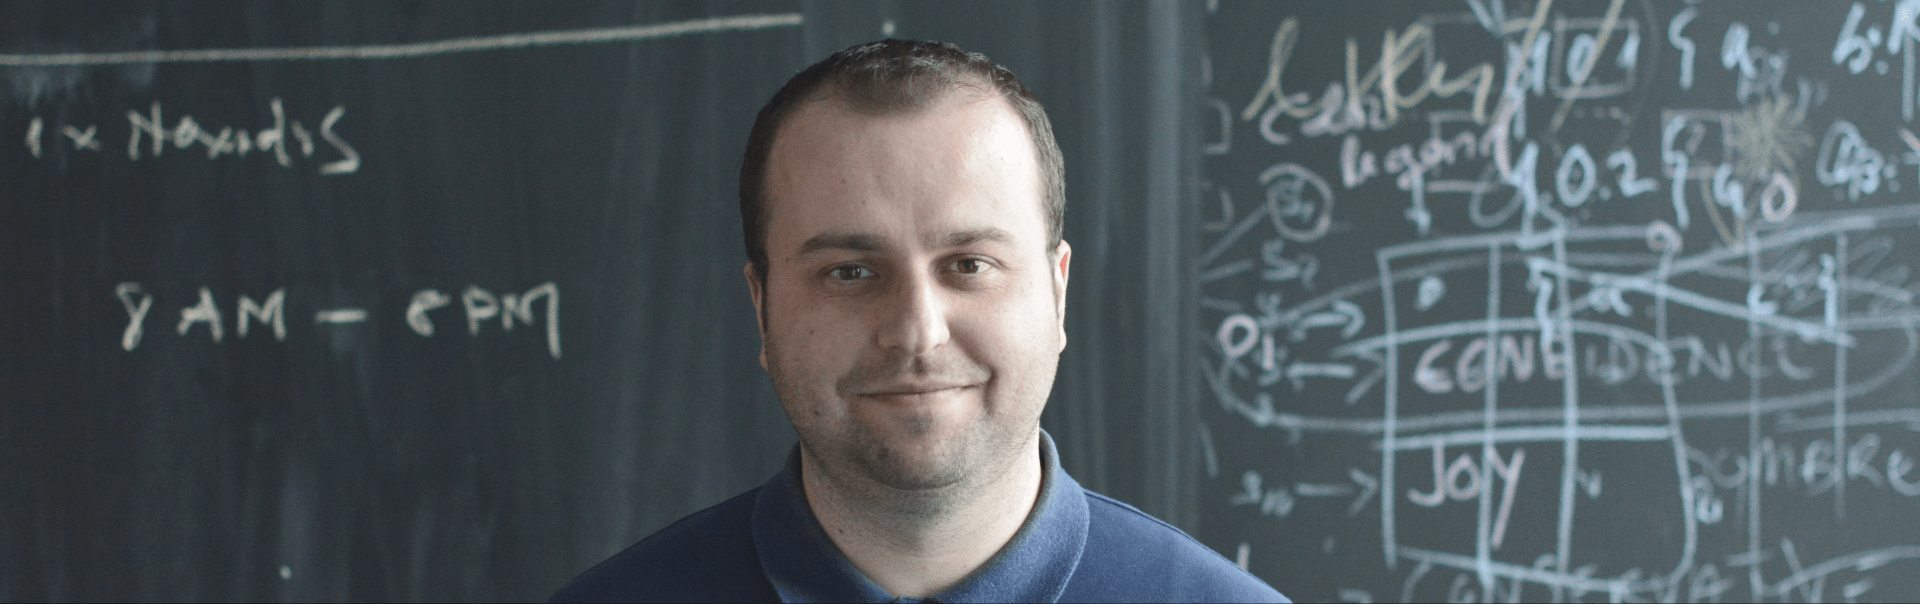 [Team Spotlight] I’m SILVIU, the QA guy, and this is how I rock automated testing at Q